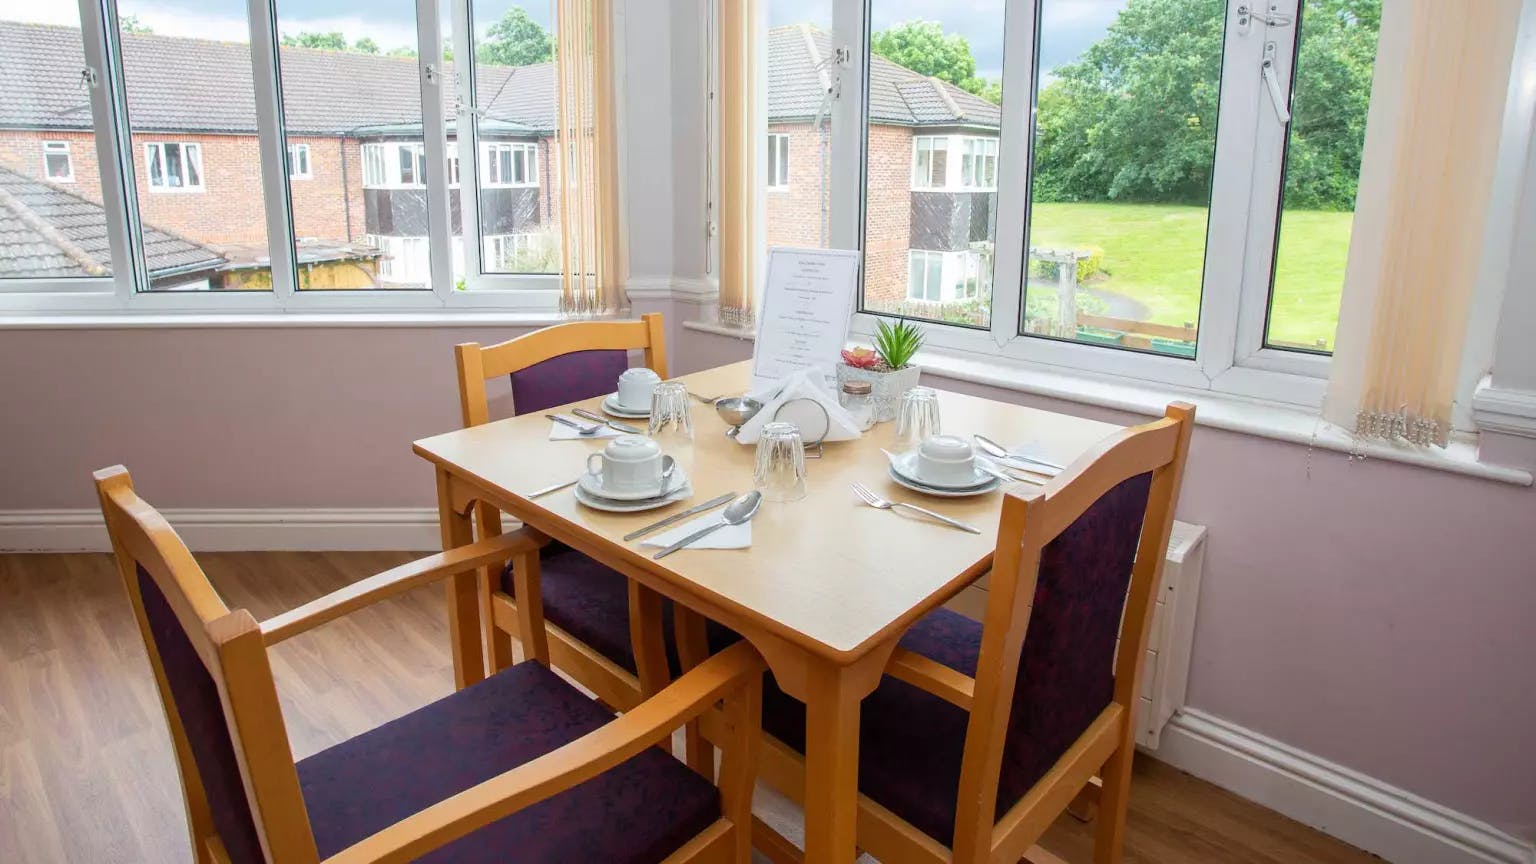 Dining room of The Mead care home in Borehamwood, Hertfordshire